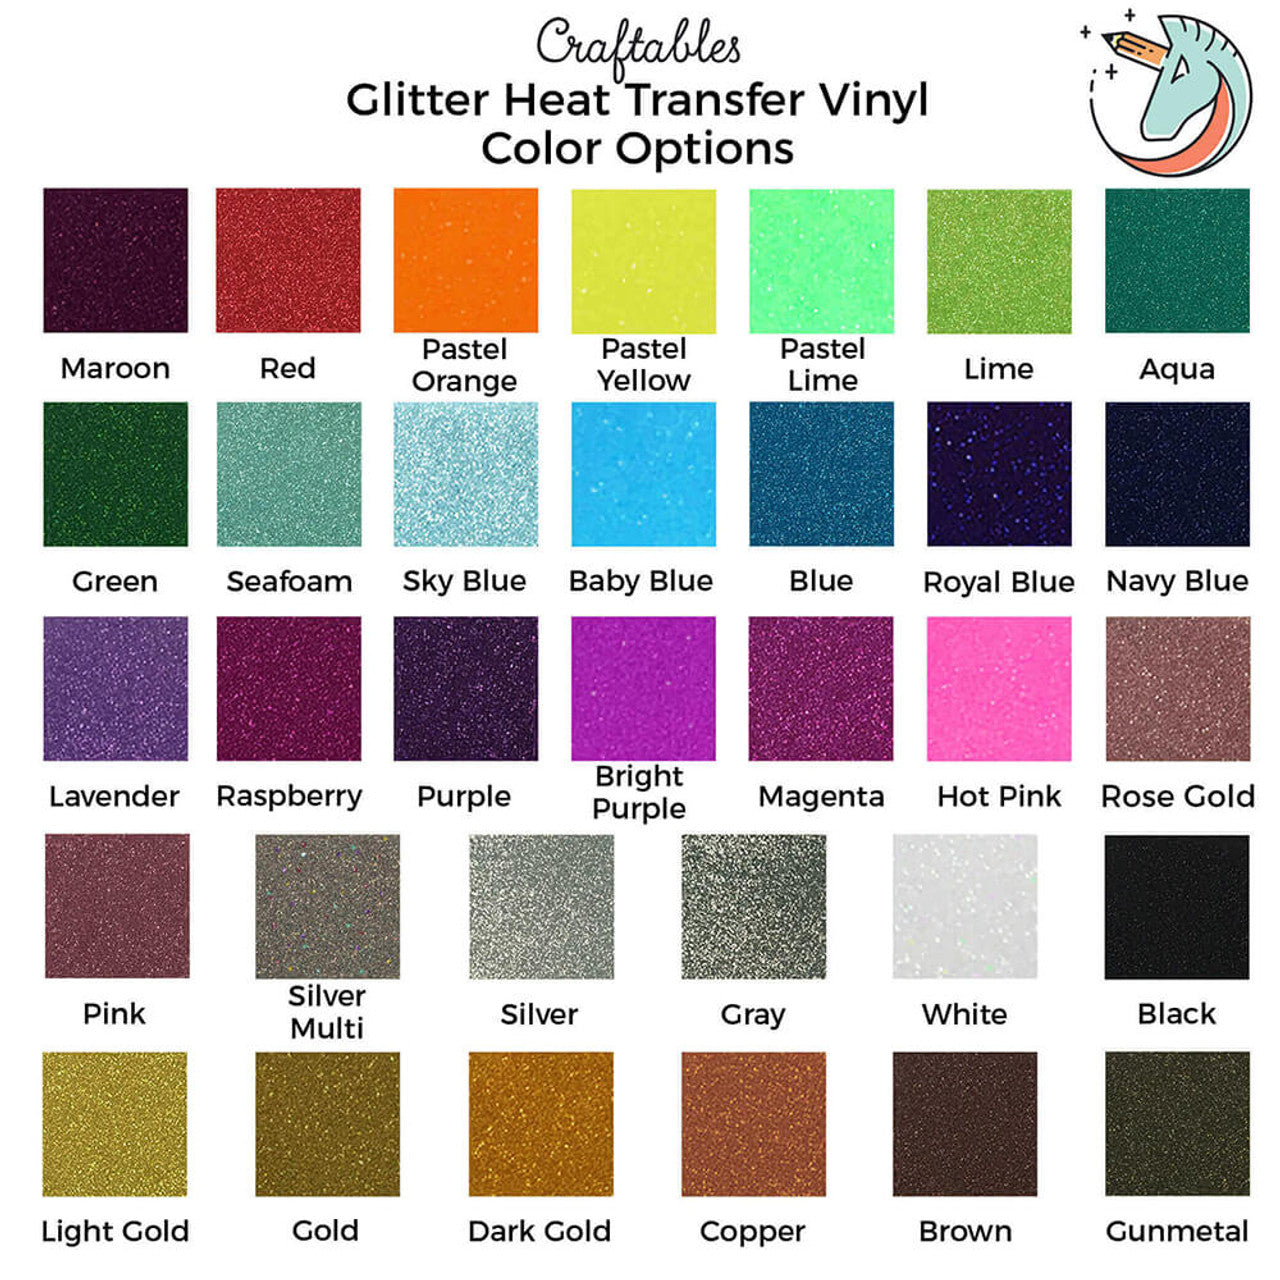 Brown Glitter Heat Transfer Vinyl Sheets By Craftables